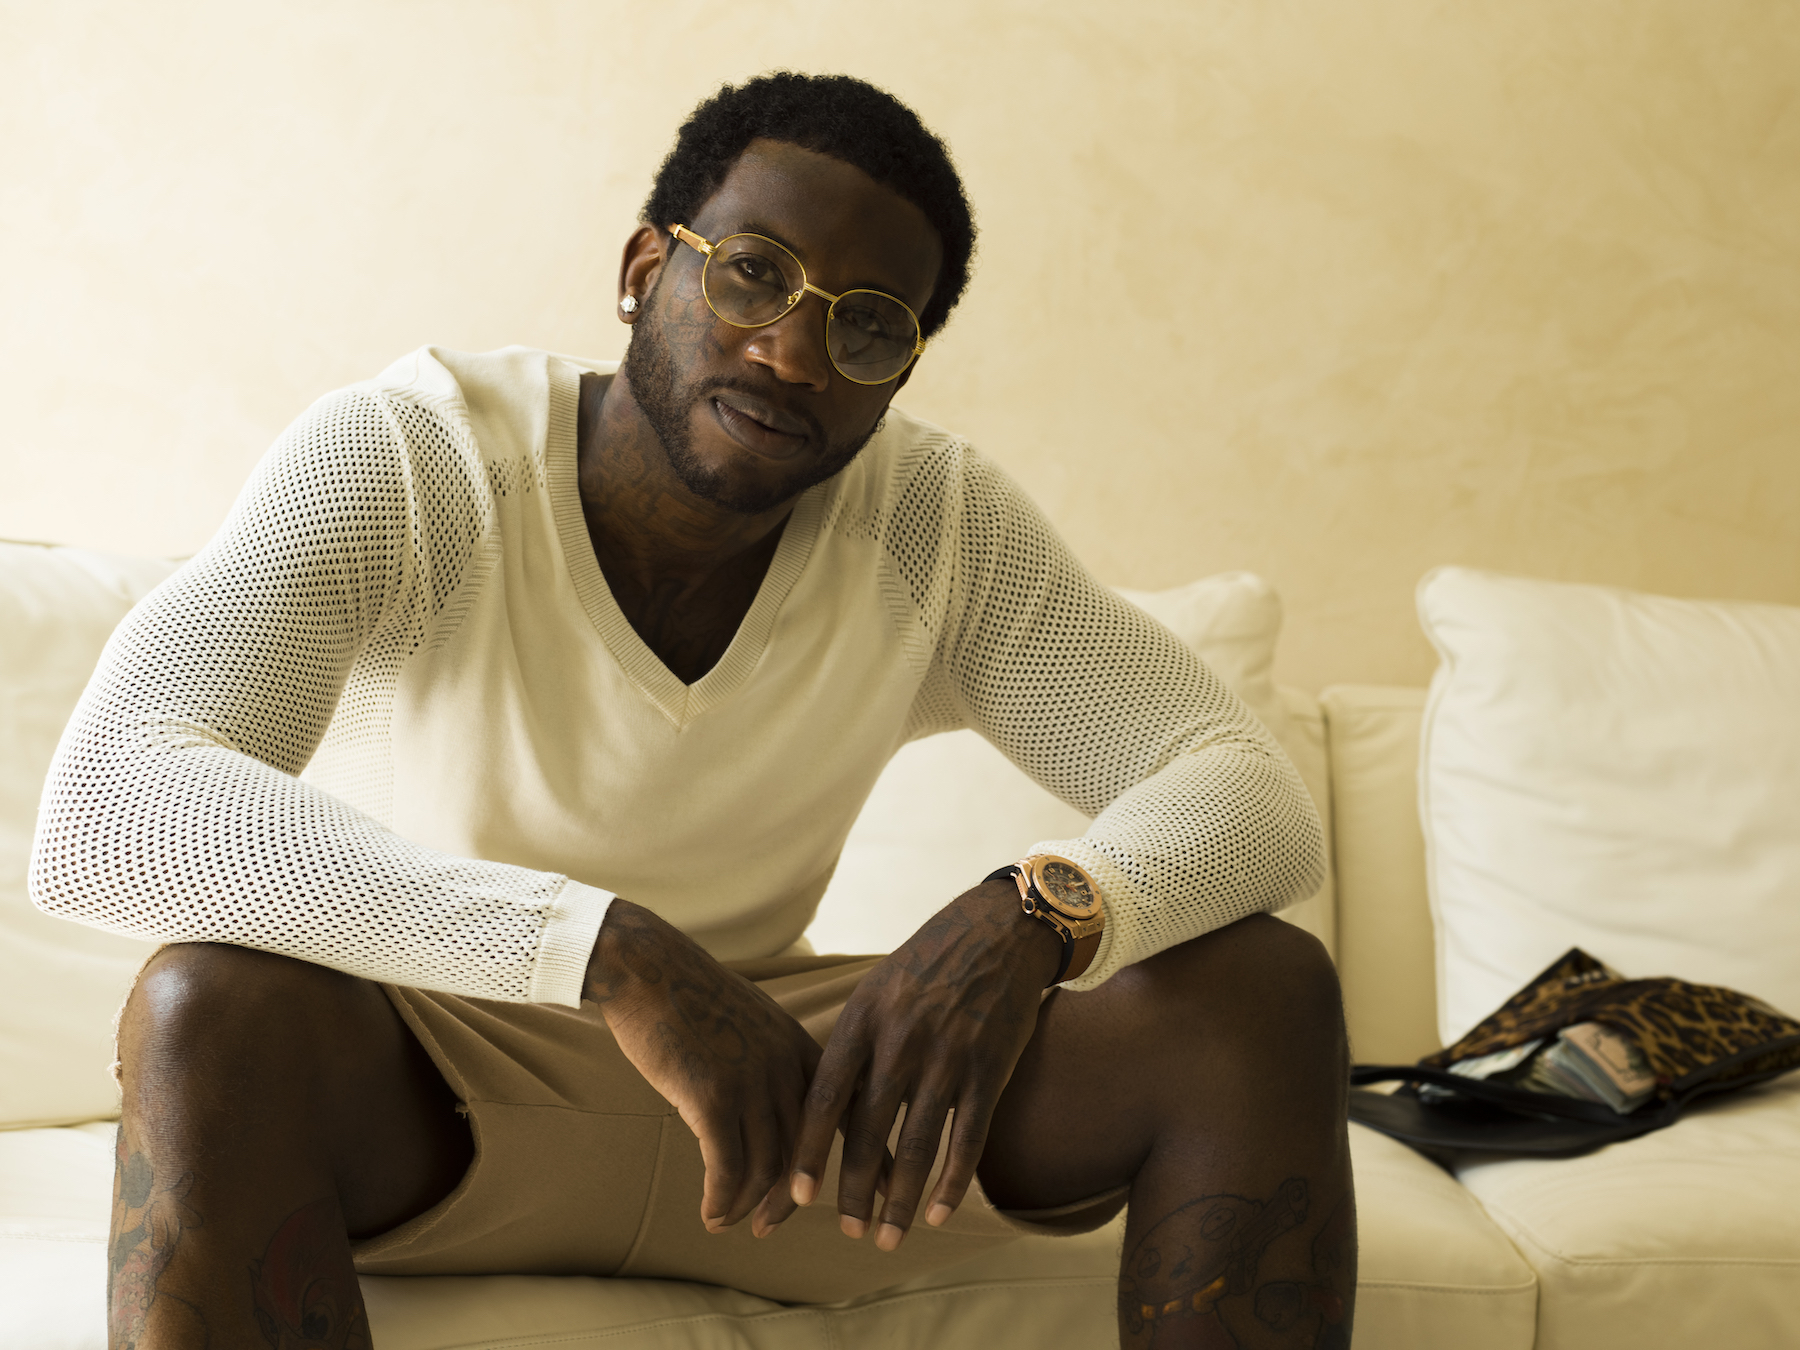 Gucci Mane Latest to Join Drai's Nightclub's All-Star Roster